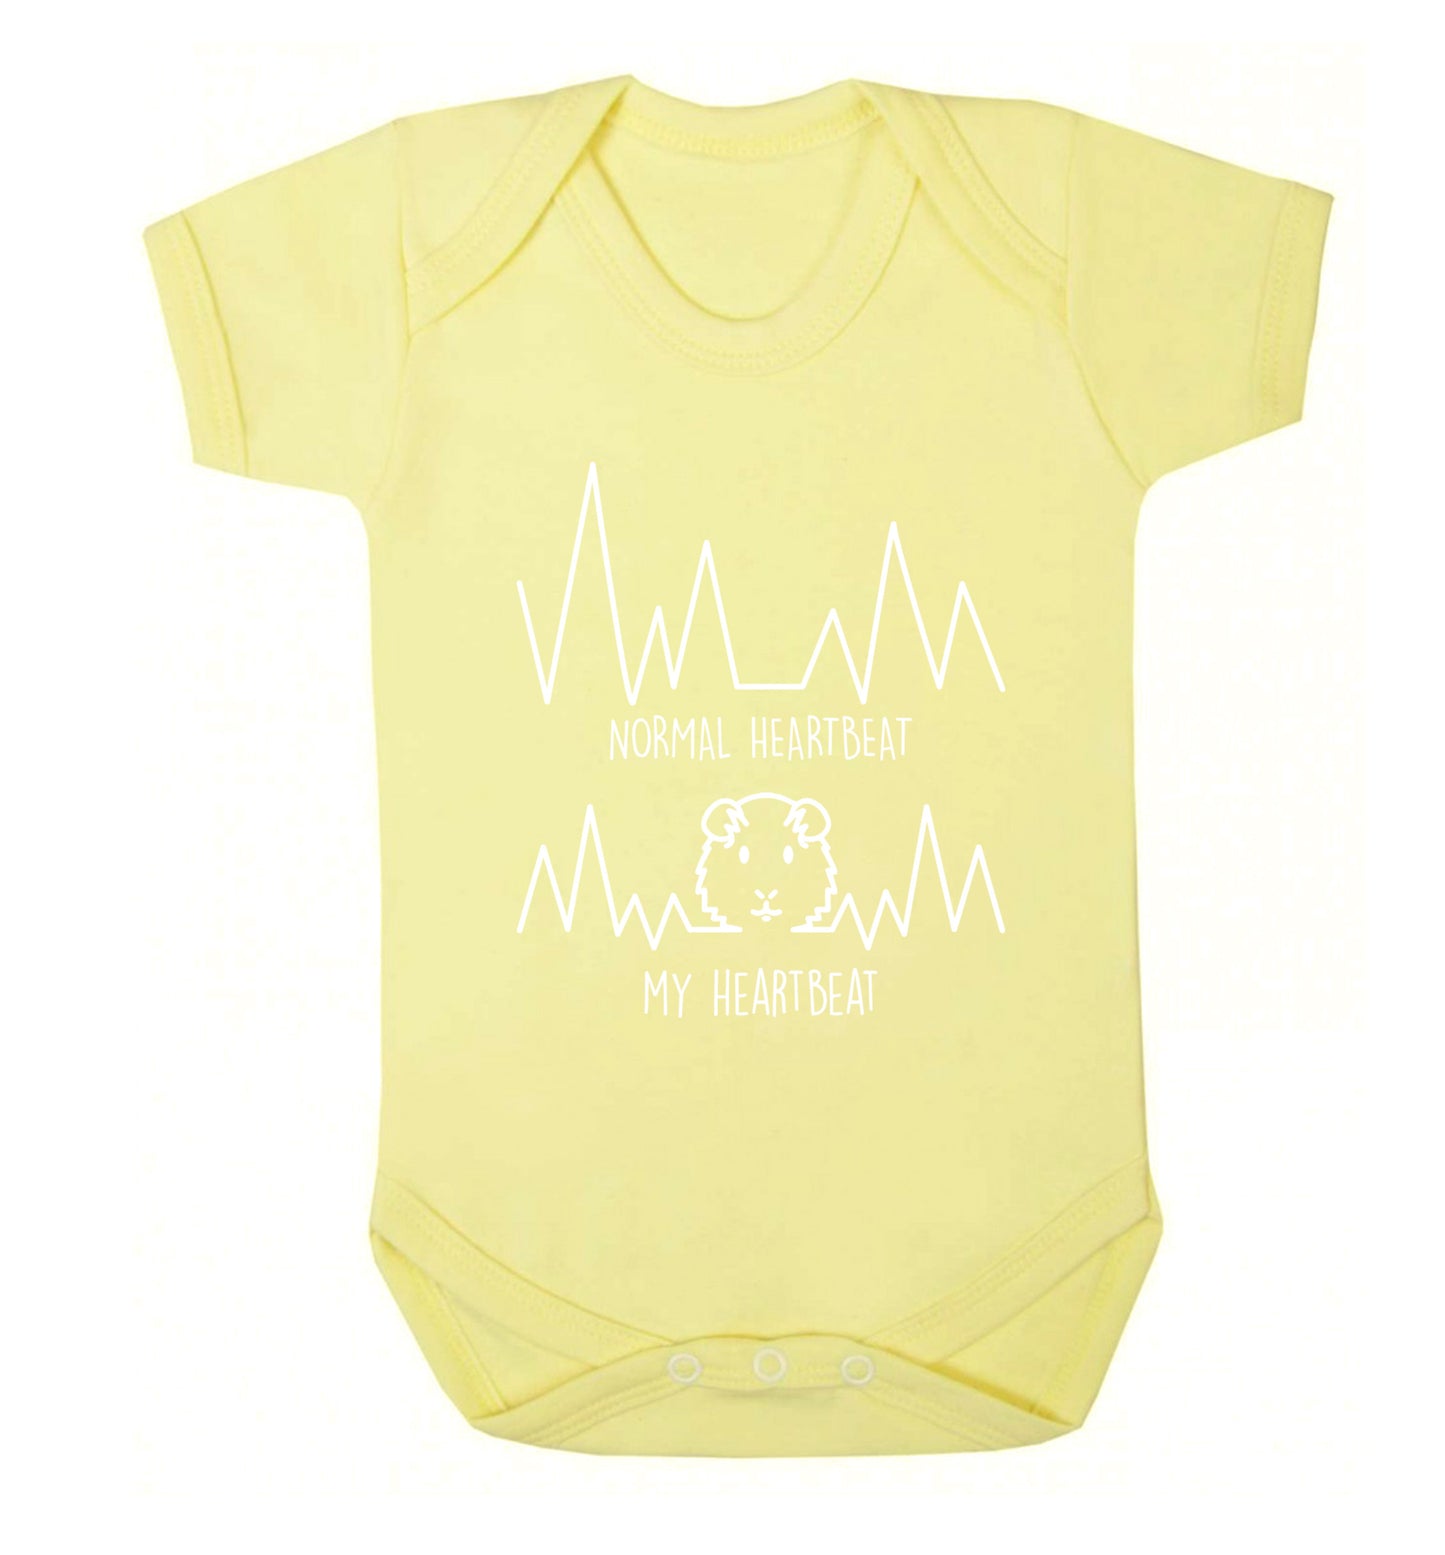 Normal heartbeat vs my heartbeat guinea pig lover Baby Vest pale yellow 18-24 months